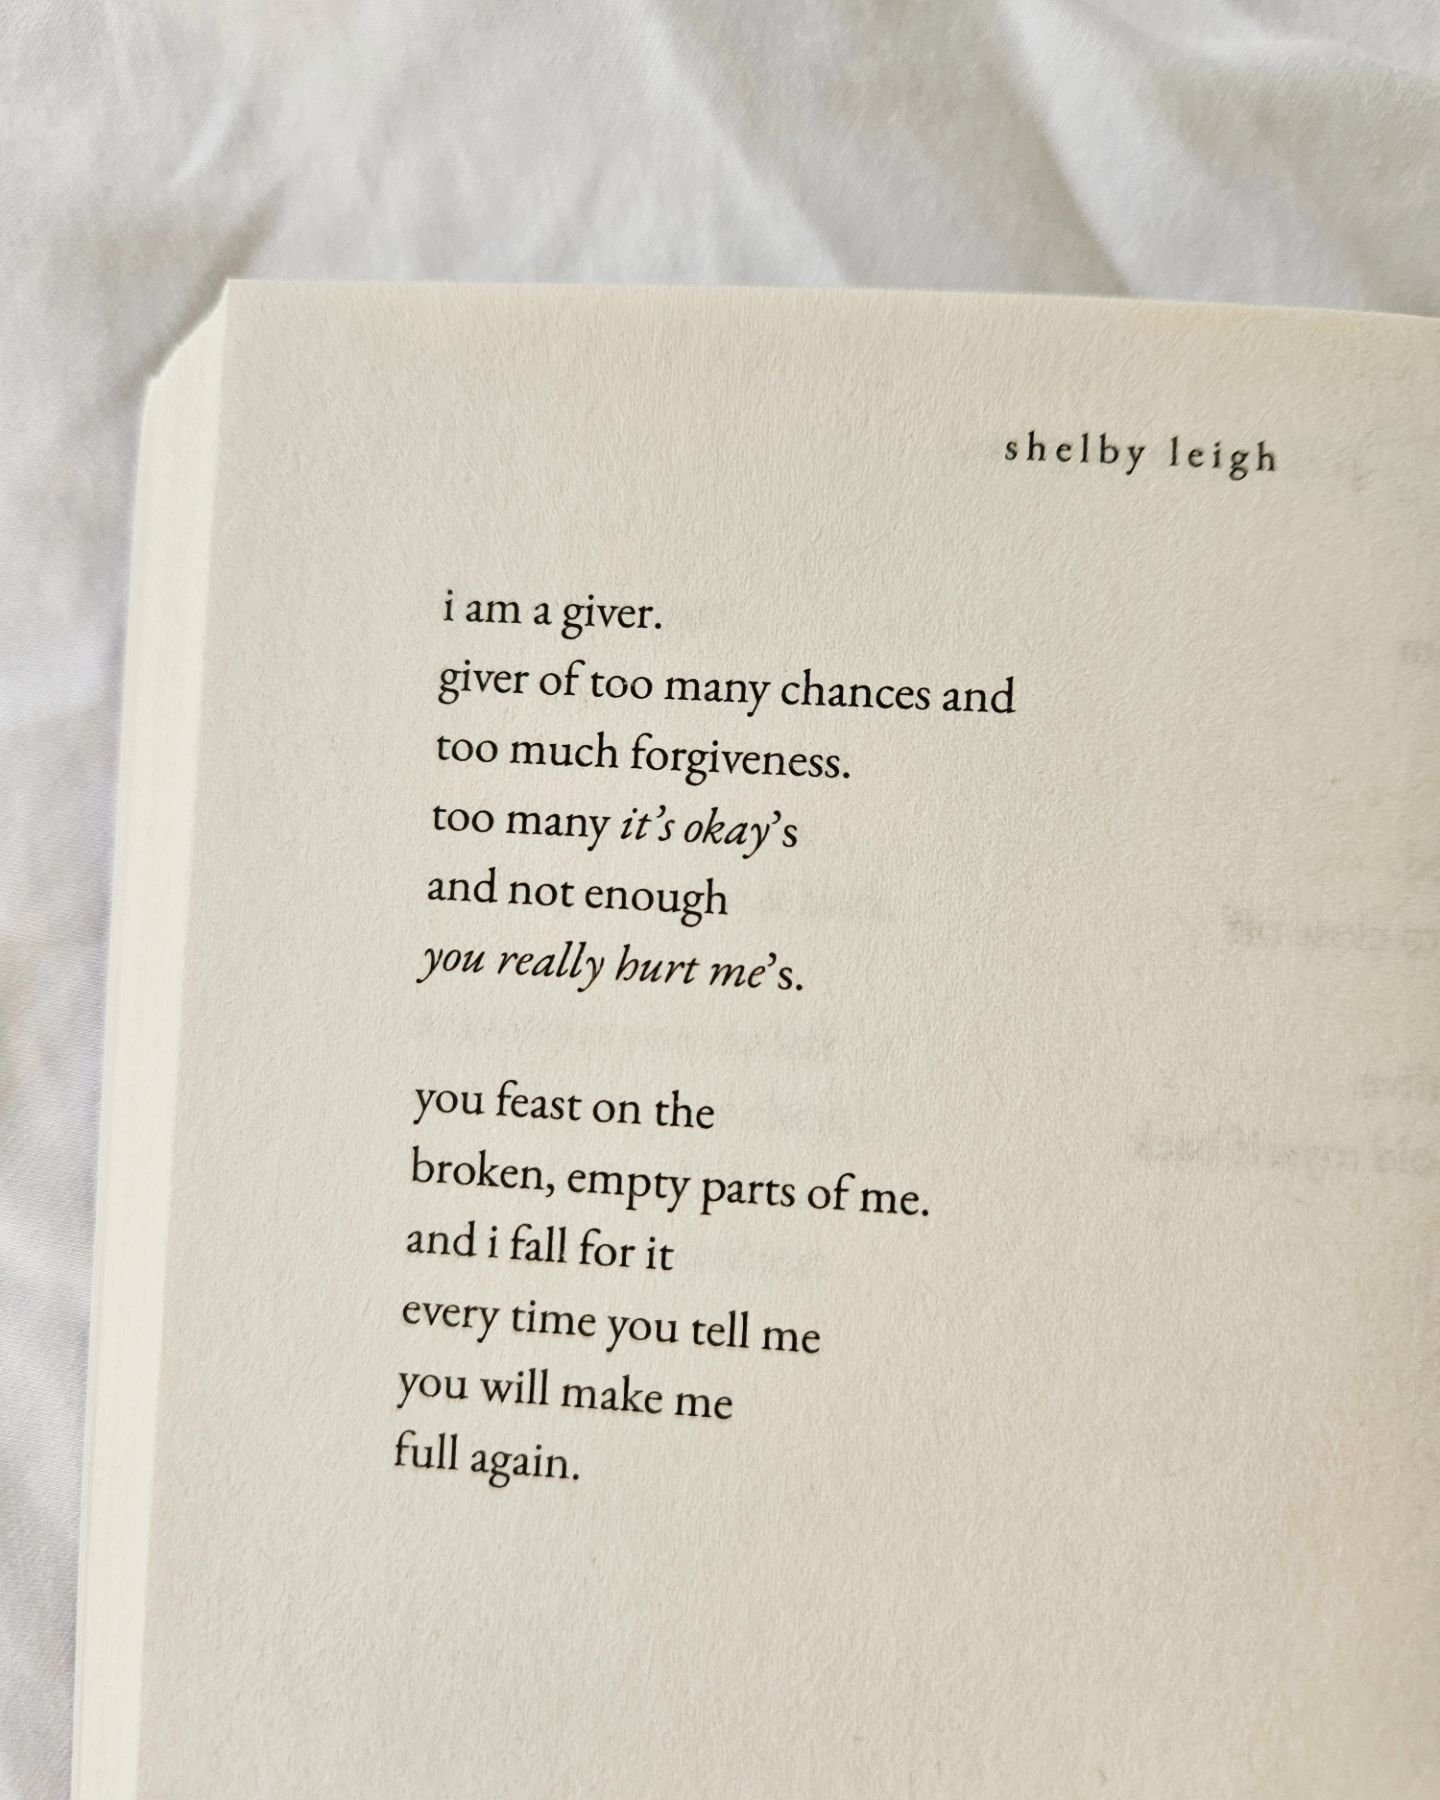 sometimes, in our journey of giving, we forget to reserve strength for ourselves. remember, it's okay to nurture your own garden before offering flowers to others. this poem, from &quot;girl made of glass&quot; on amazon, is a reminder of the empty f